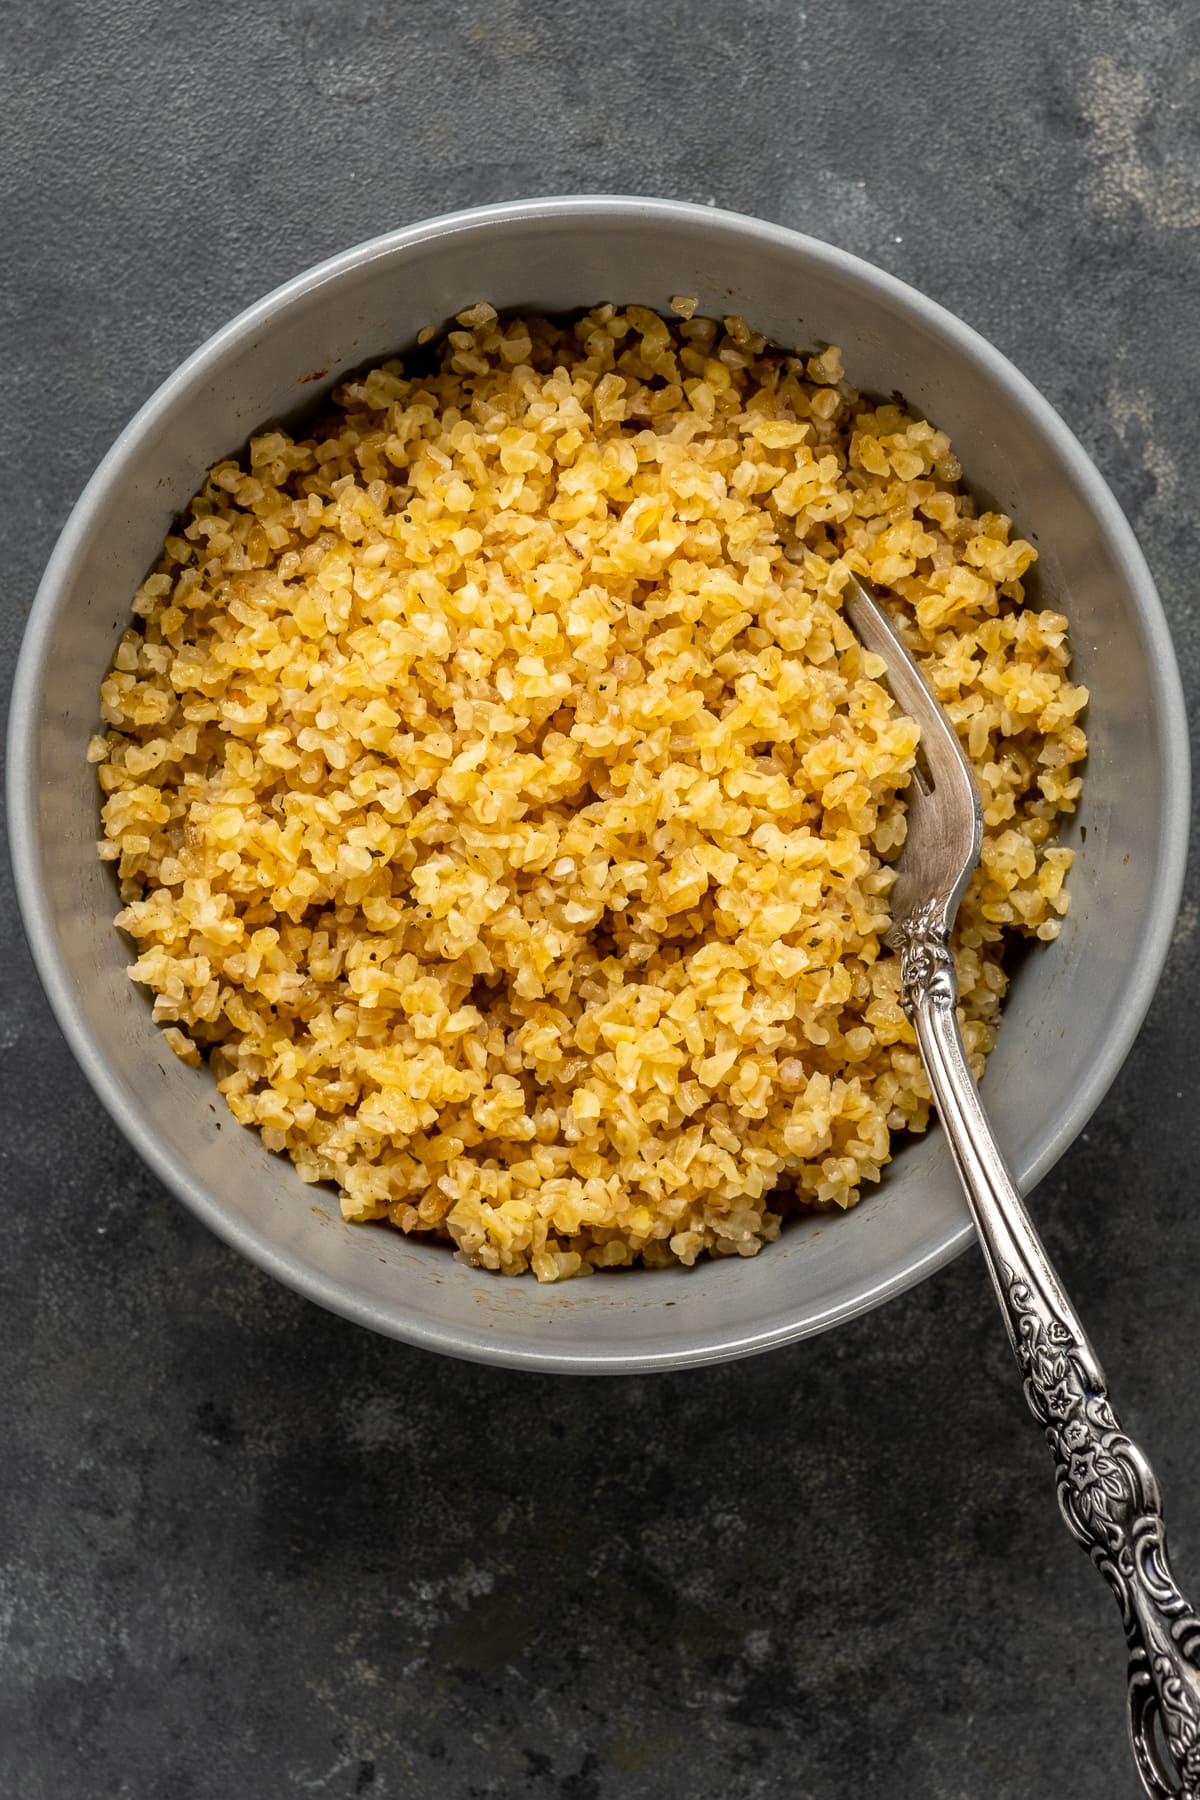 Medium bulgur in a grey bowl after soaking with a fork inside it.